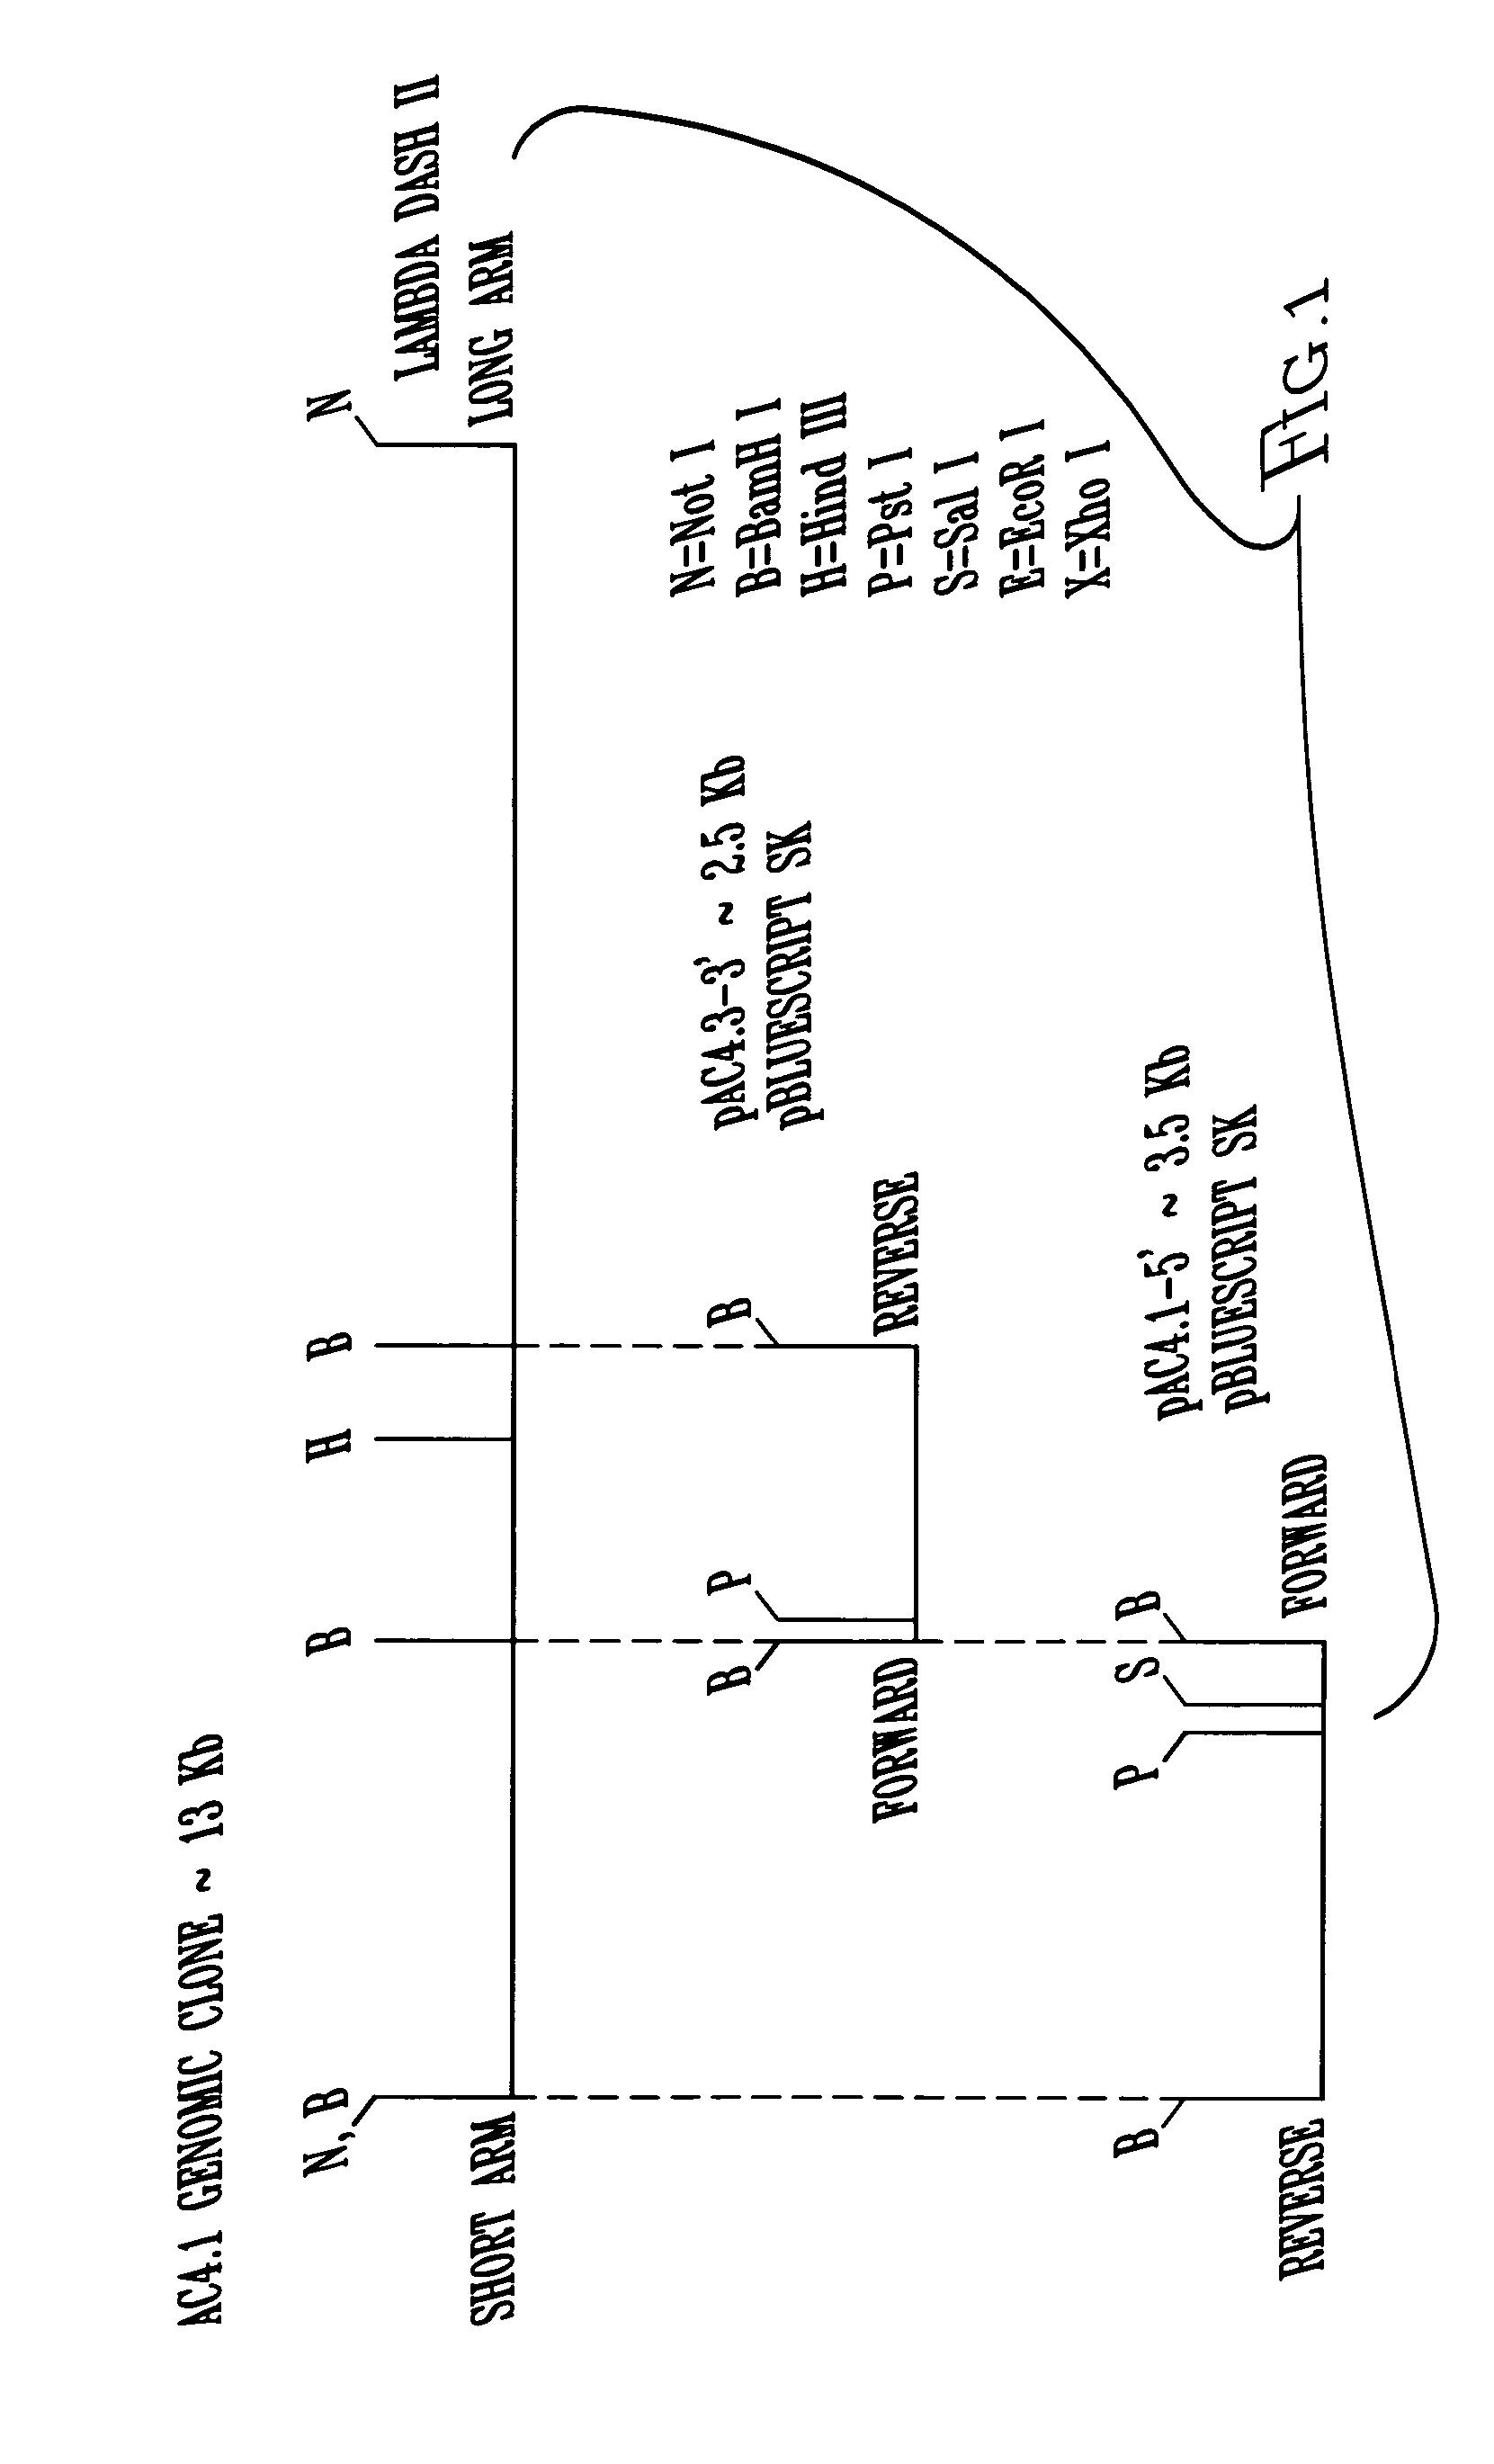 Male tissue-preferred regulatory sequences of Ms45 gene and method of using same